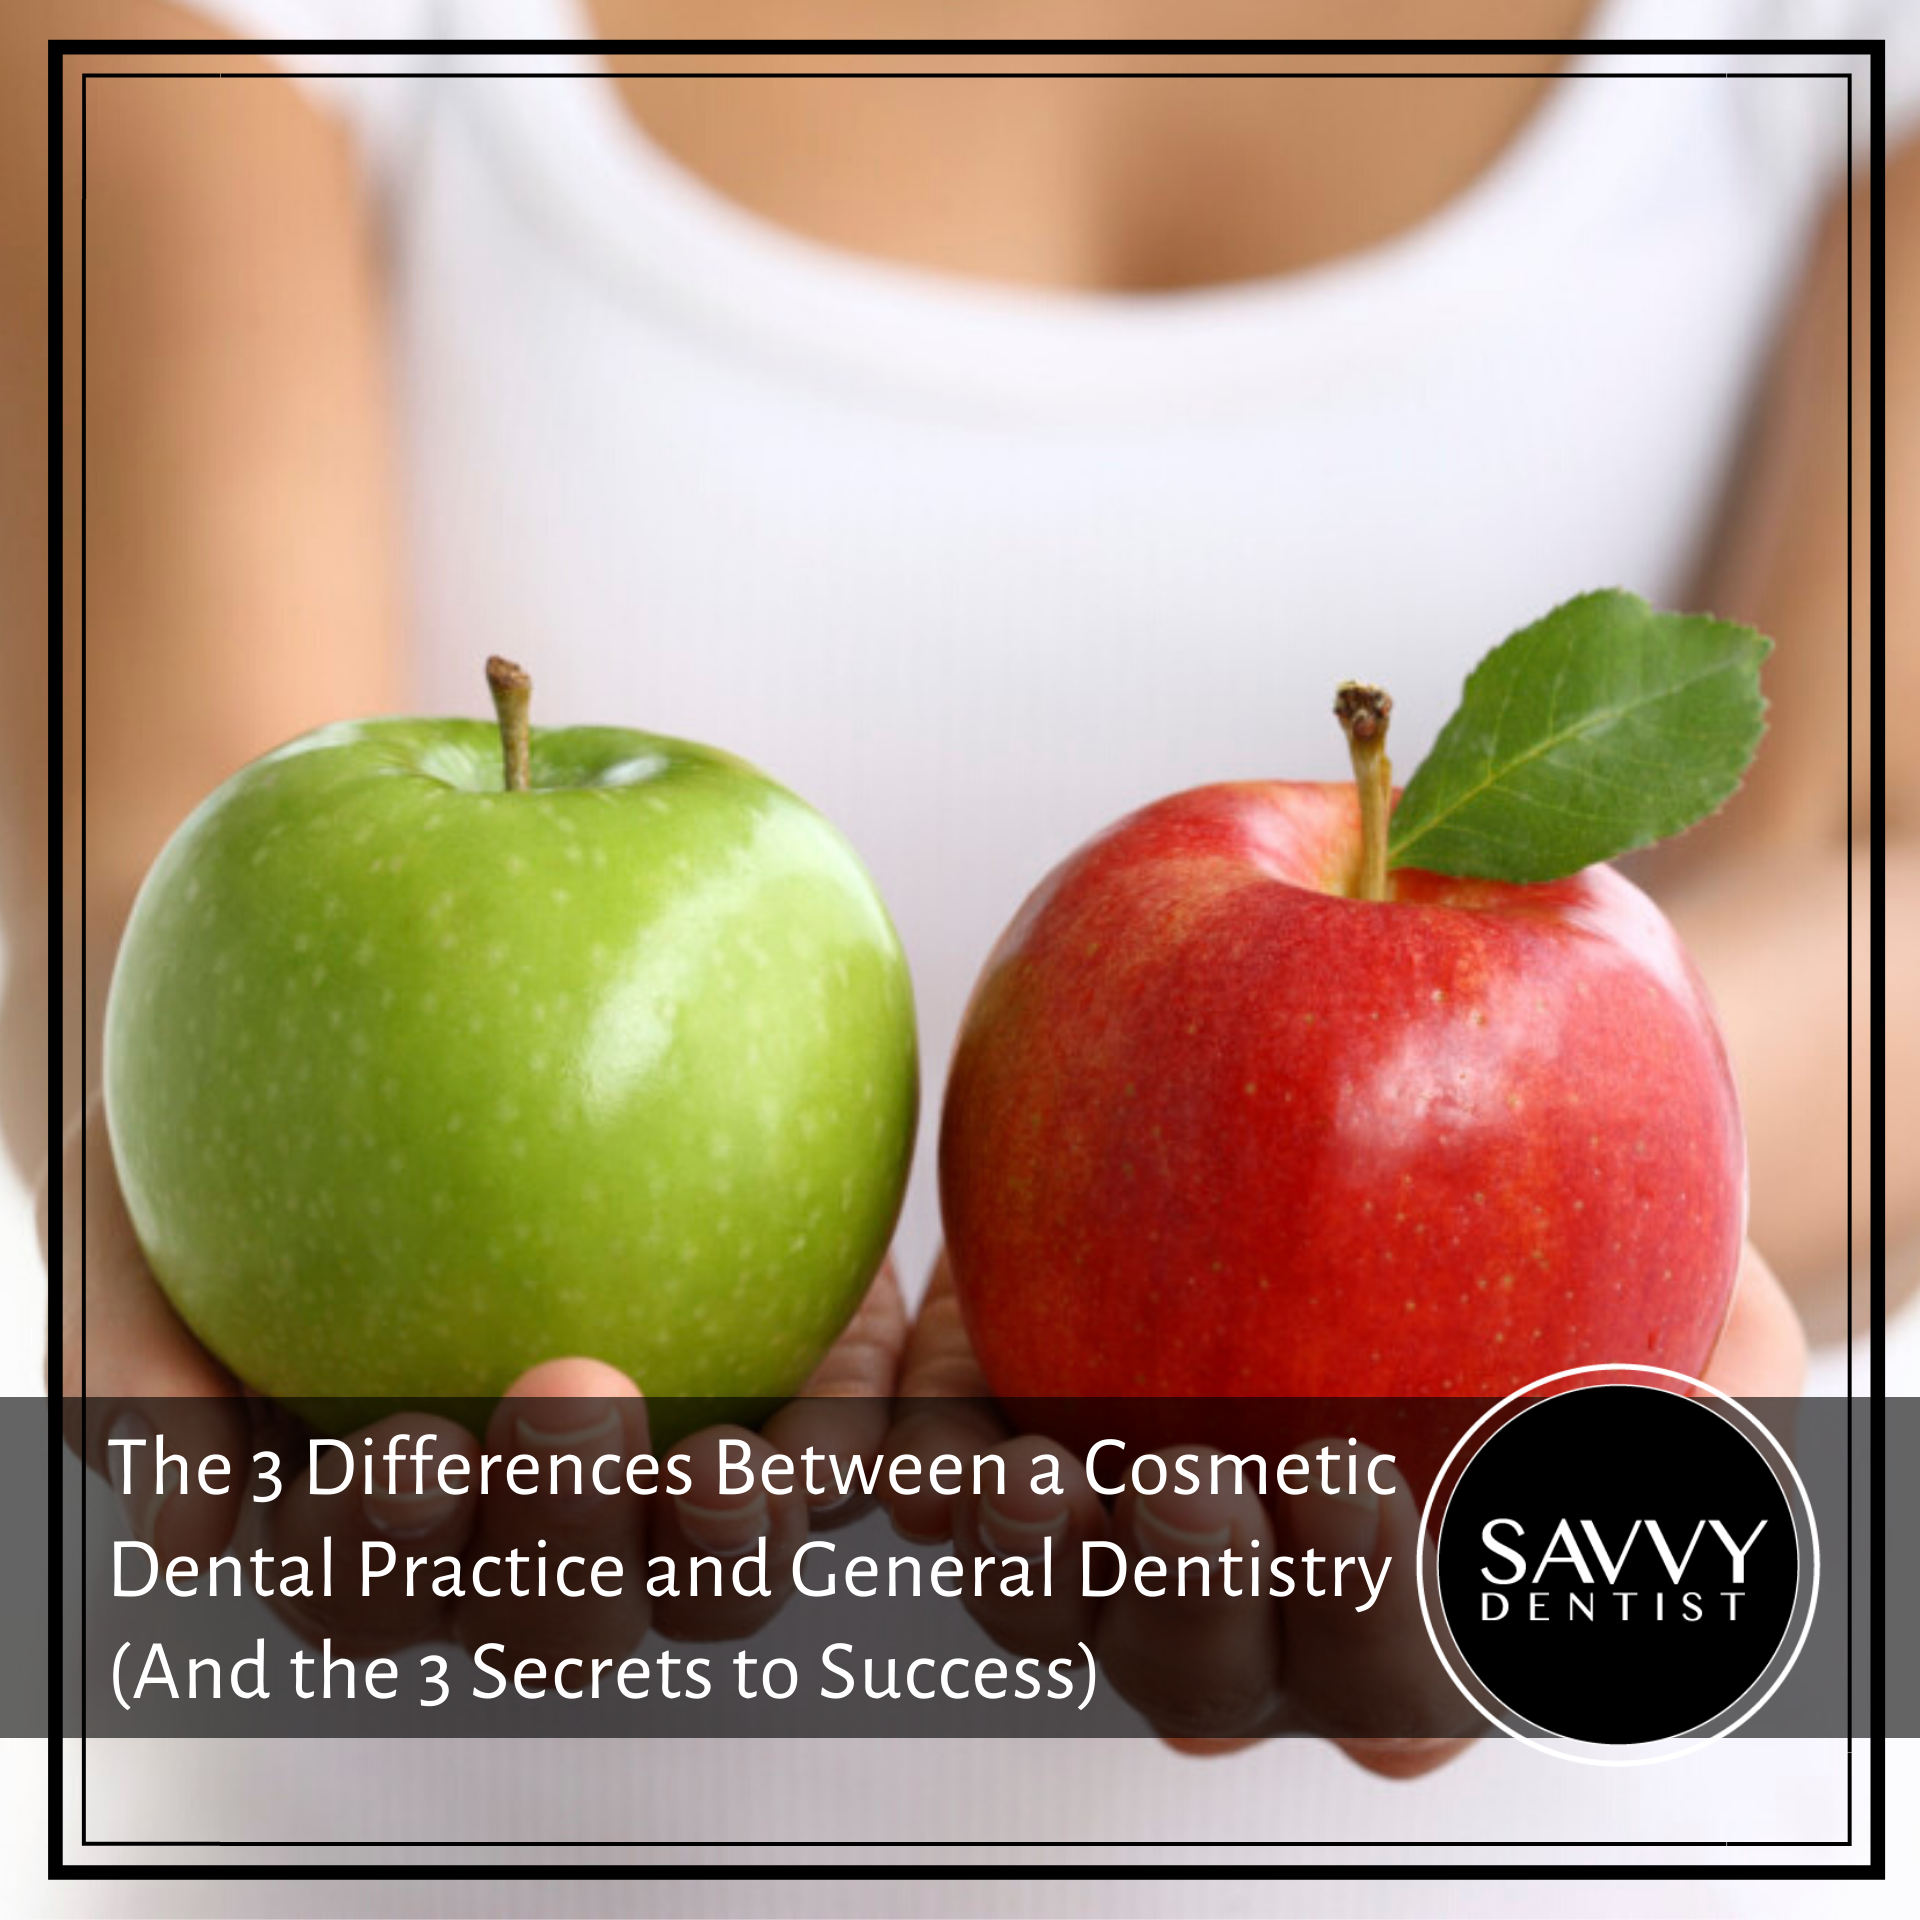 THE 3 DIFFERENCES BETWEEN A COSMETIC DENTAL PRACTICE & GENERAL DENTISTRY